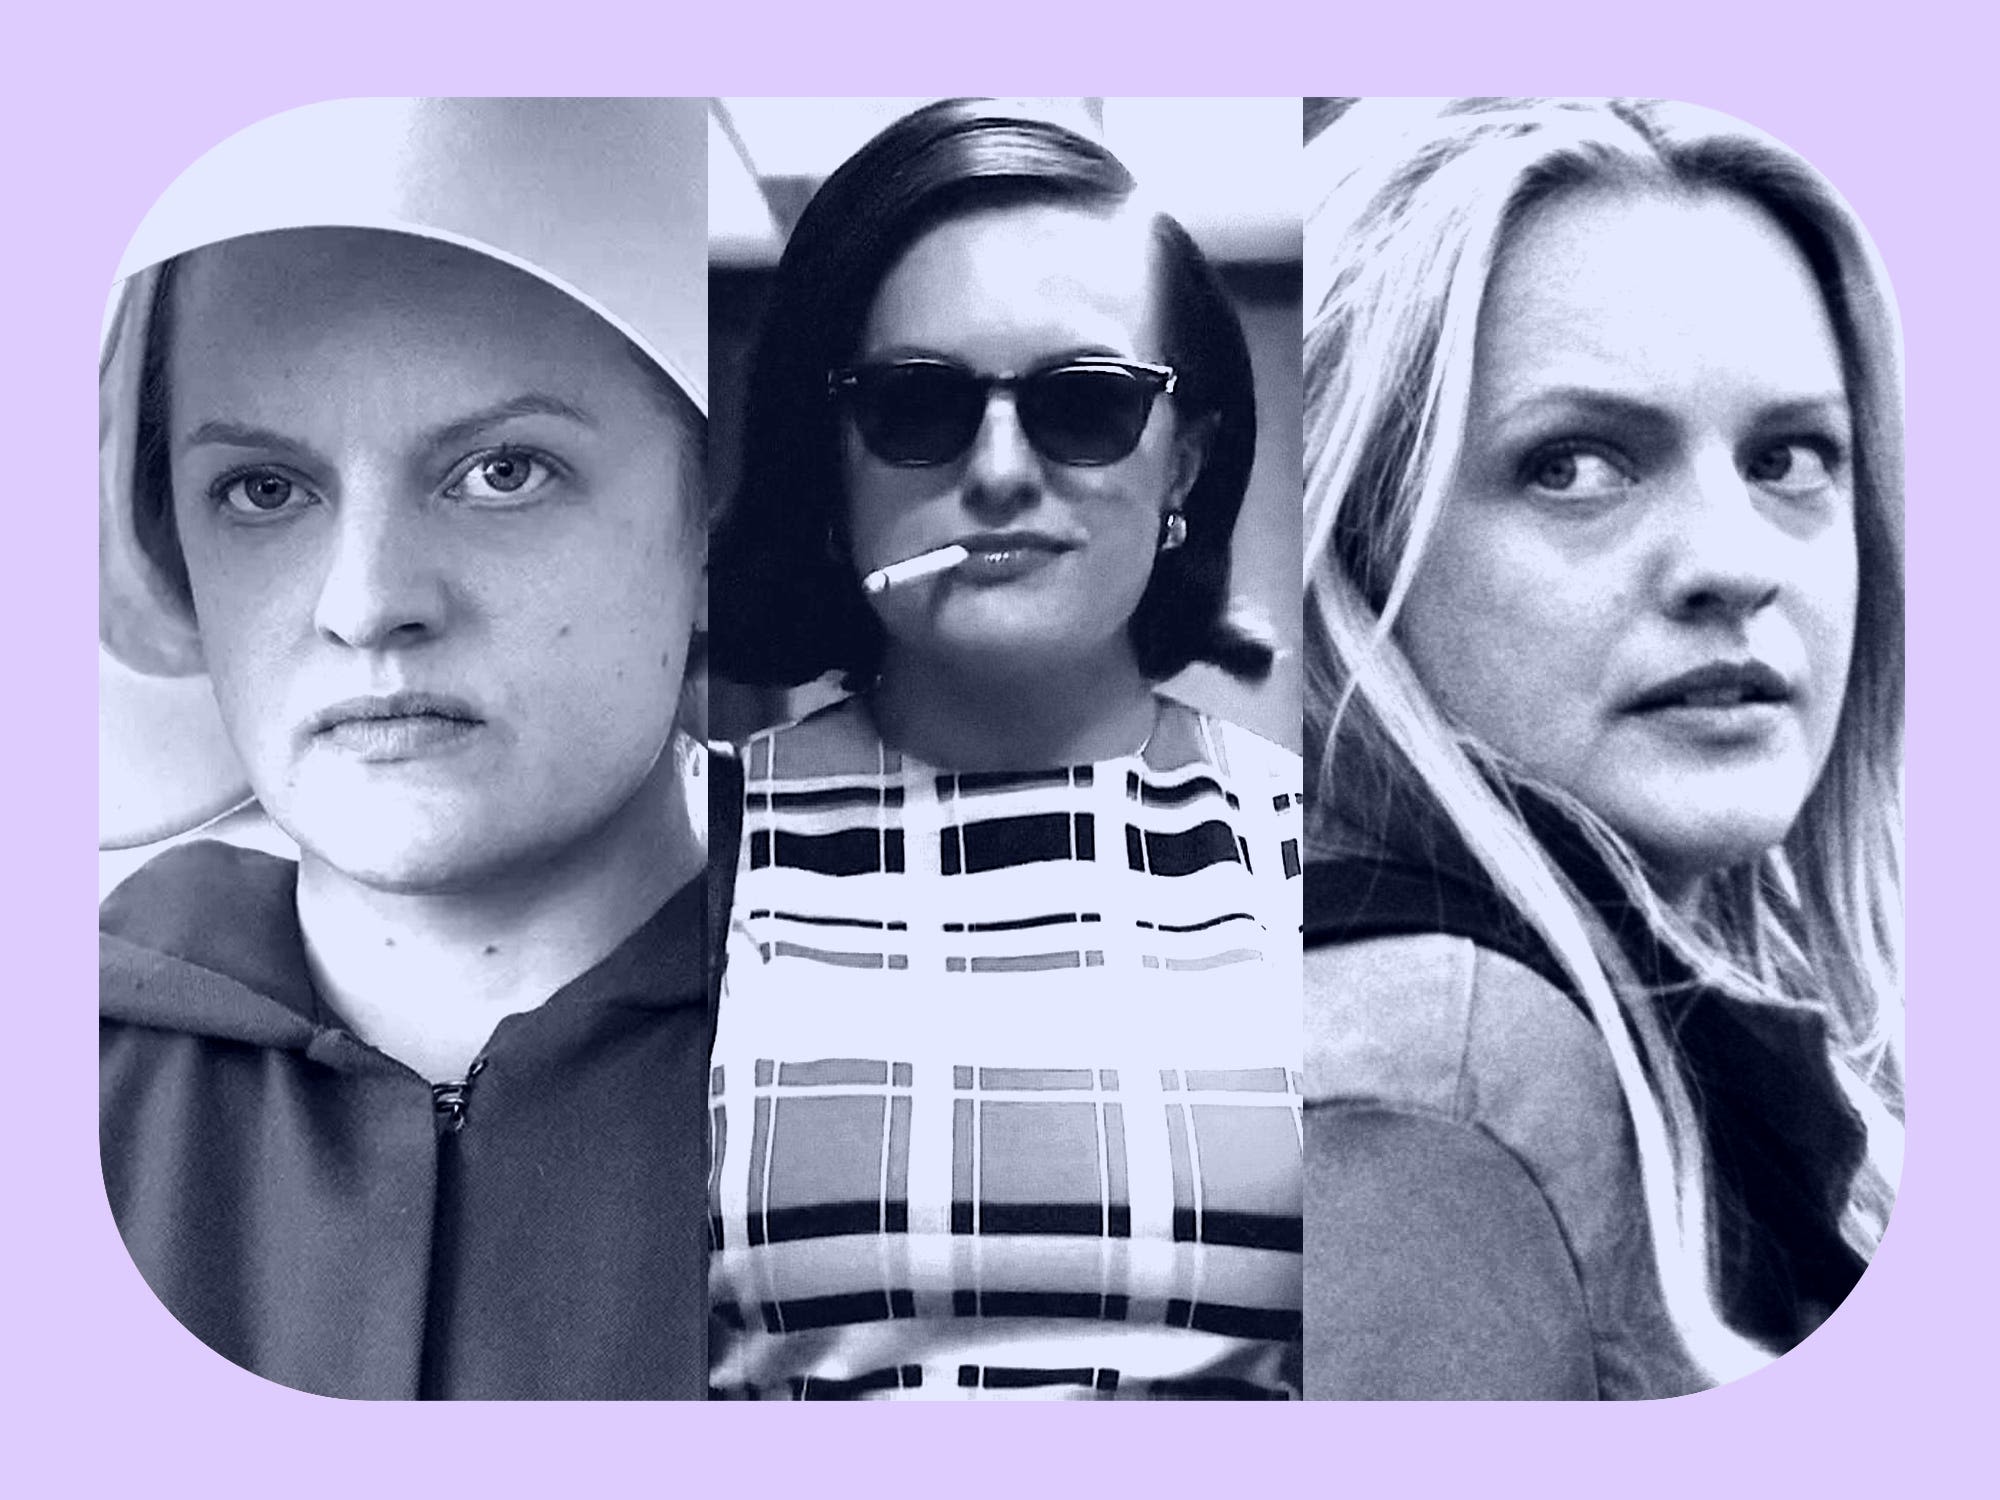 Elisabeth Moss will be bringing her baby to the "Handmaid's Tale" set